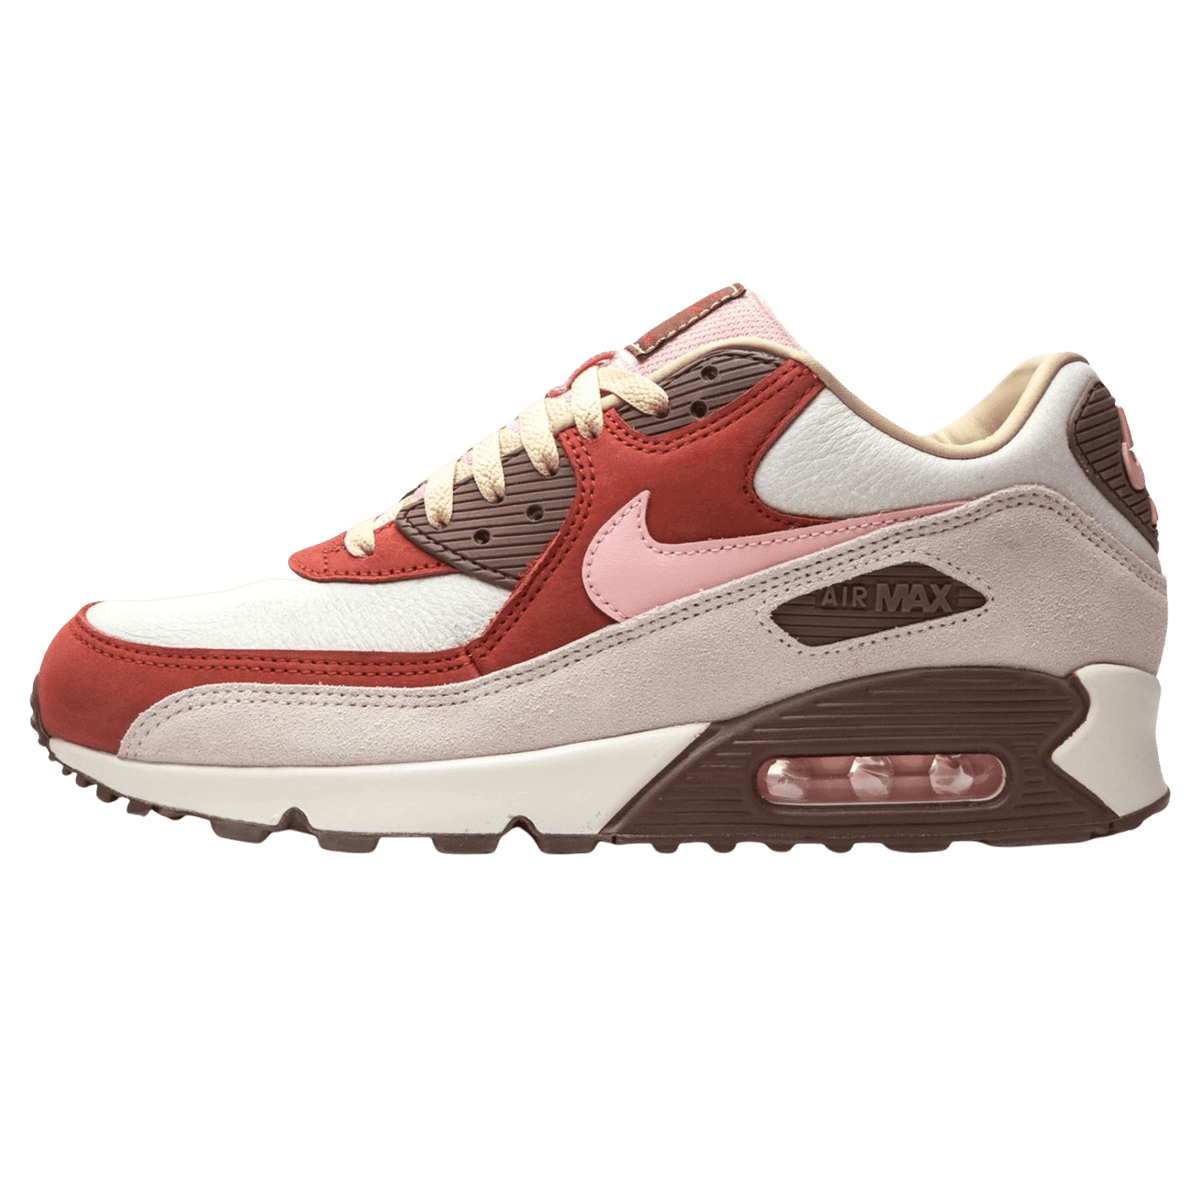 Nike Air Max 90 Triple Red - general for sale - by owner - craigslist